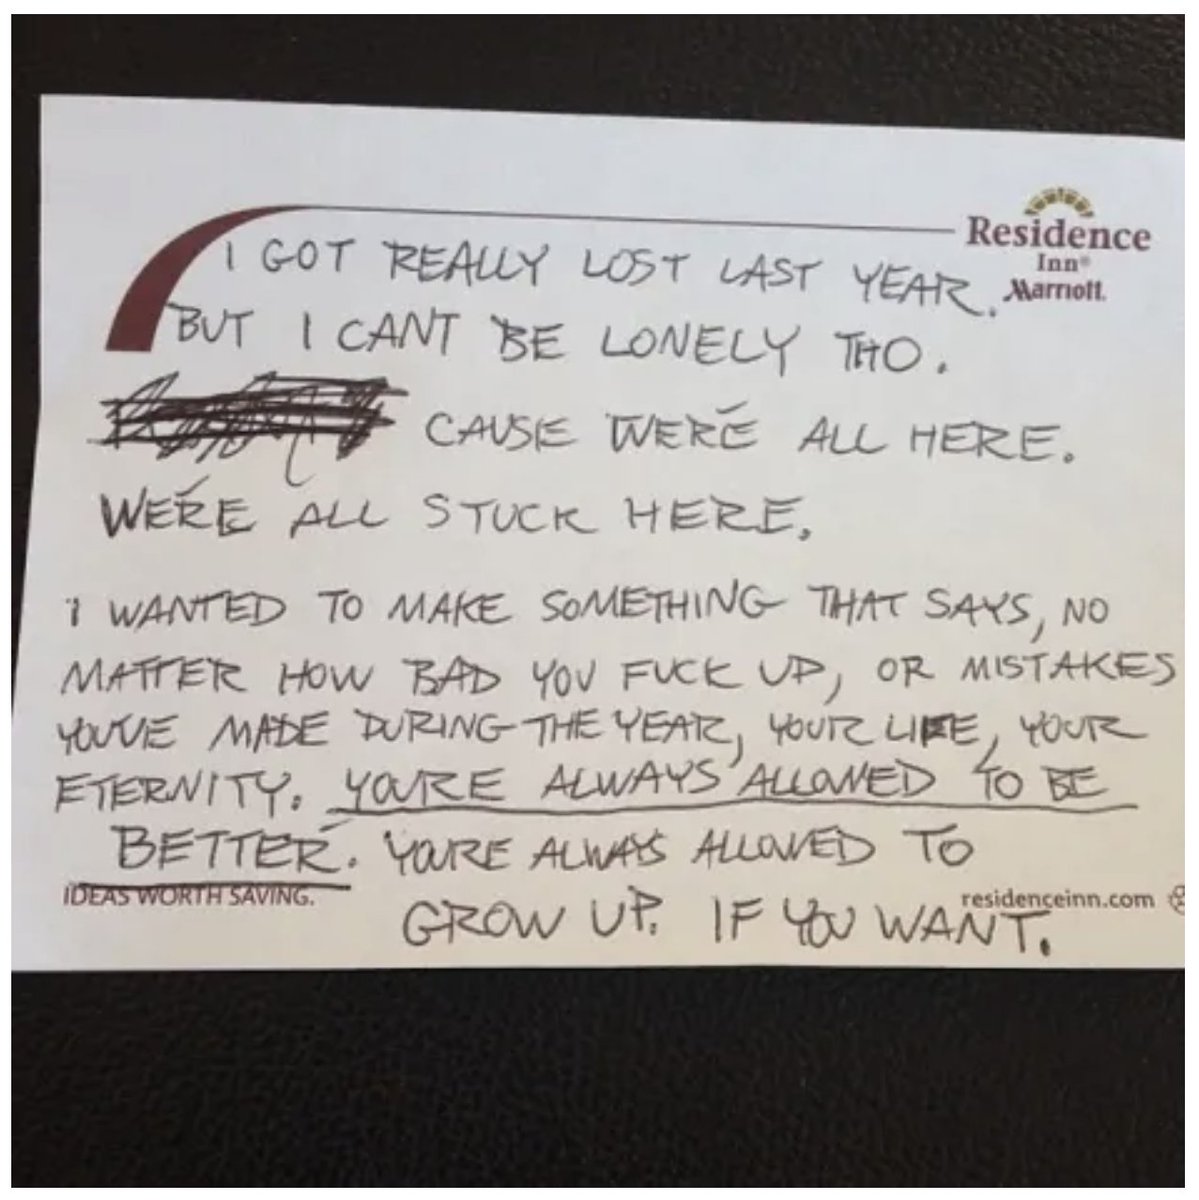 on this day 7 years ago, donald glover took to instagram to post a series of notesvulnerably detailing insecurities and fears, the notes capture the feeling of grappling with our existential dilemmas in the age of the internet